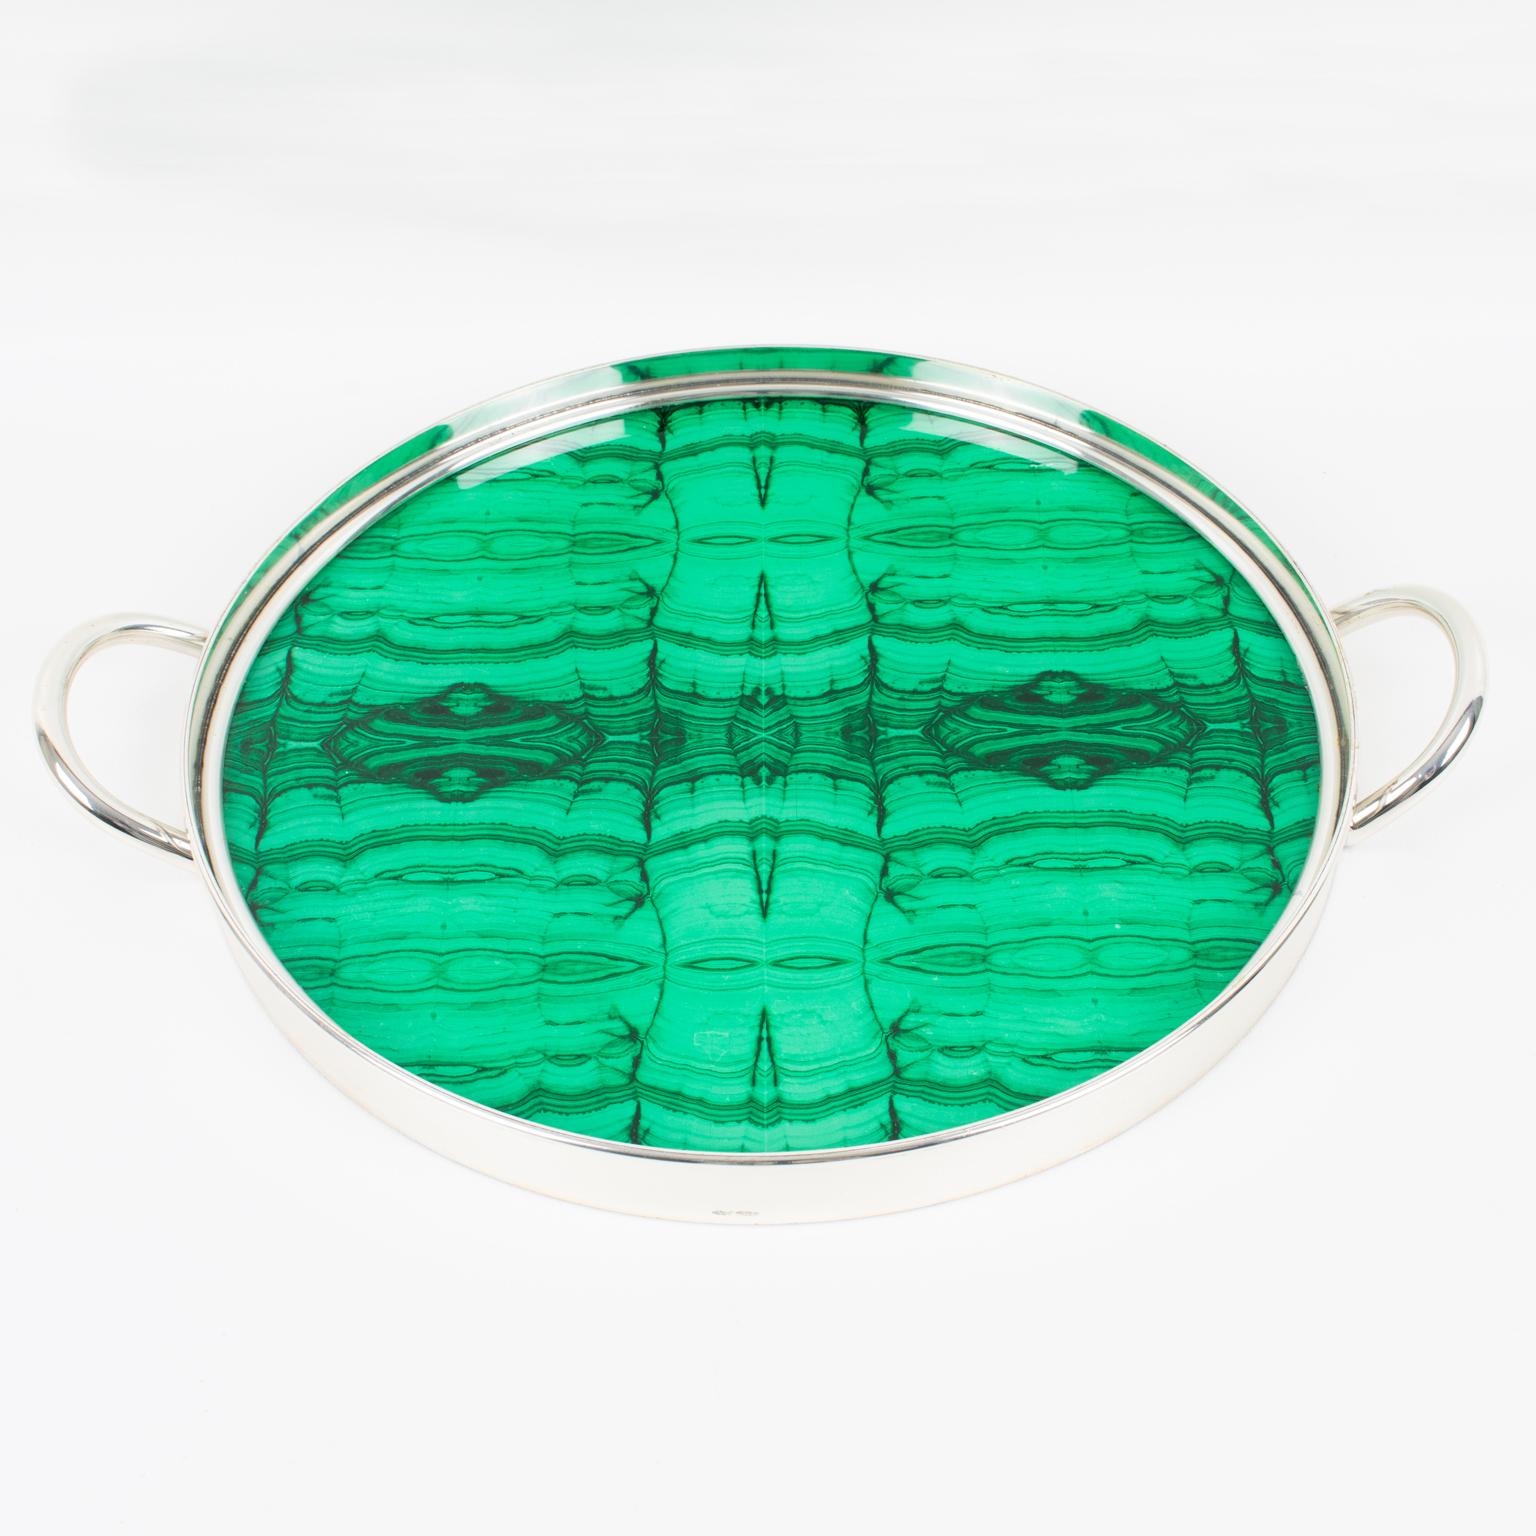 Late 20th Century Italian Modernist Silver Plate and Malachite-like Serving Tray, 1970s